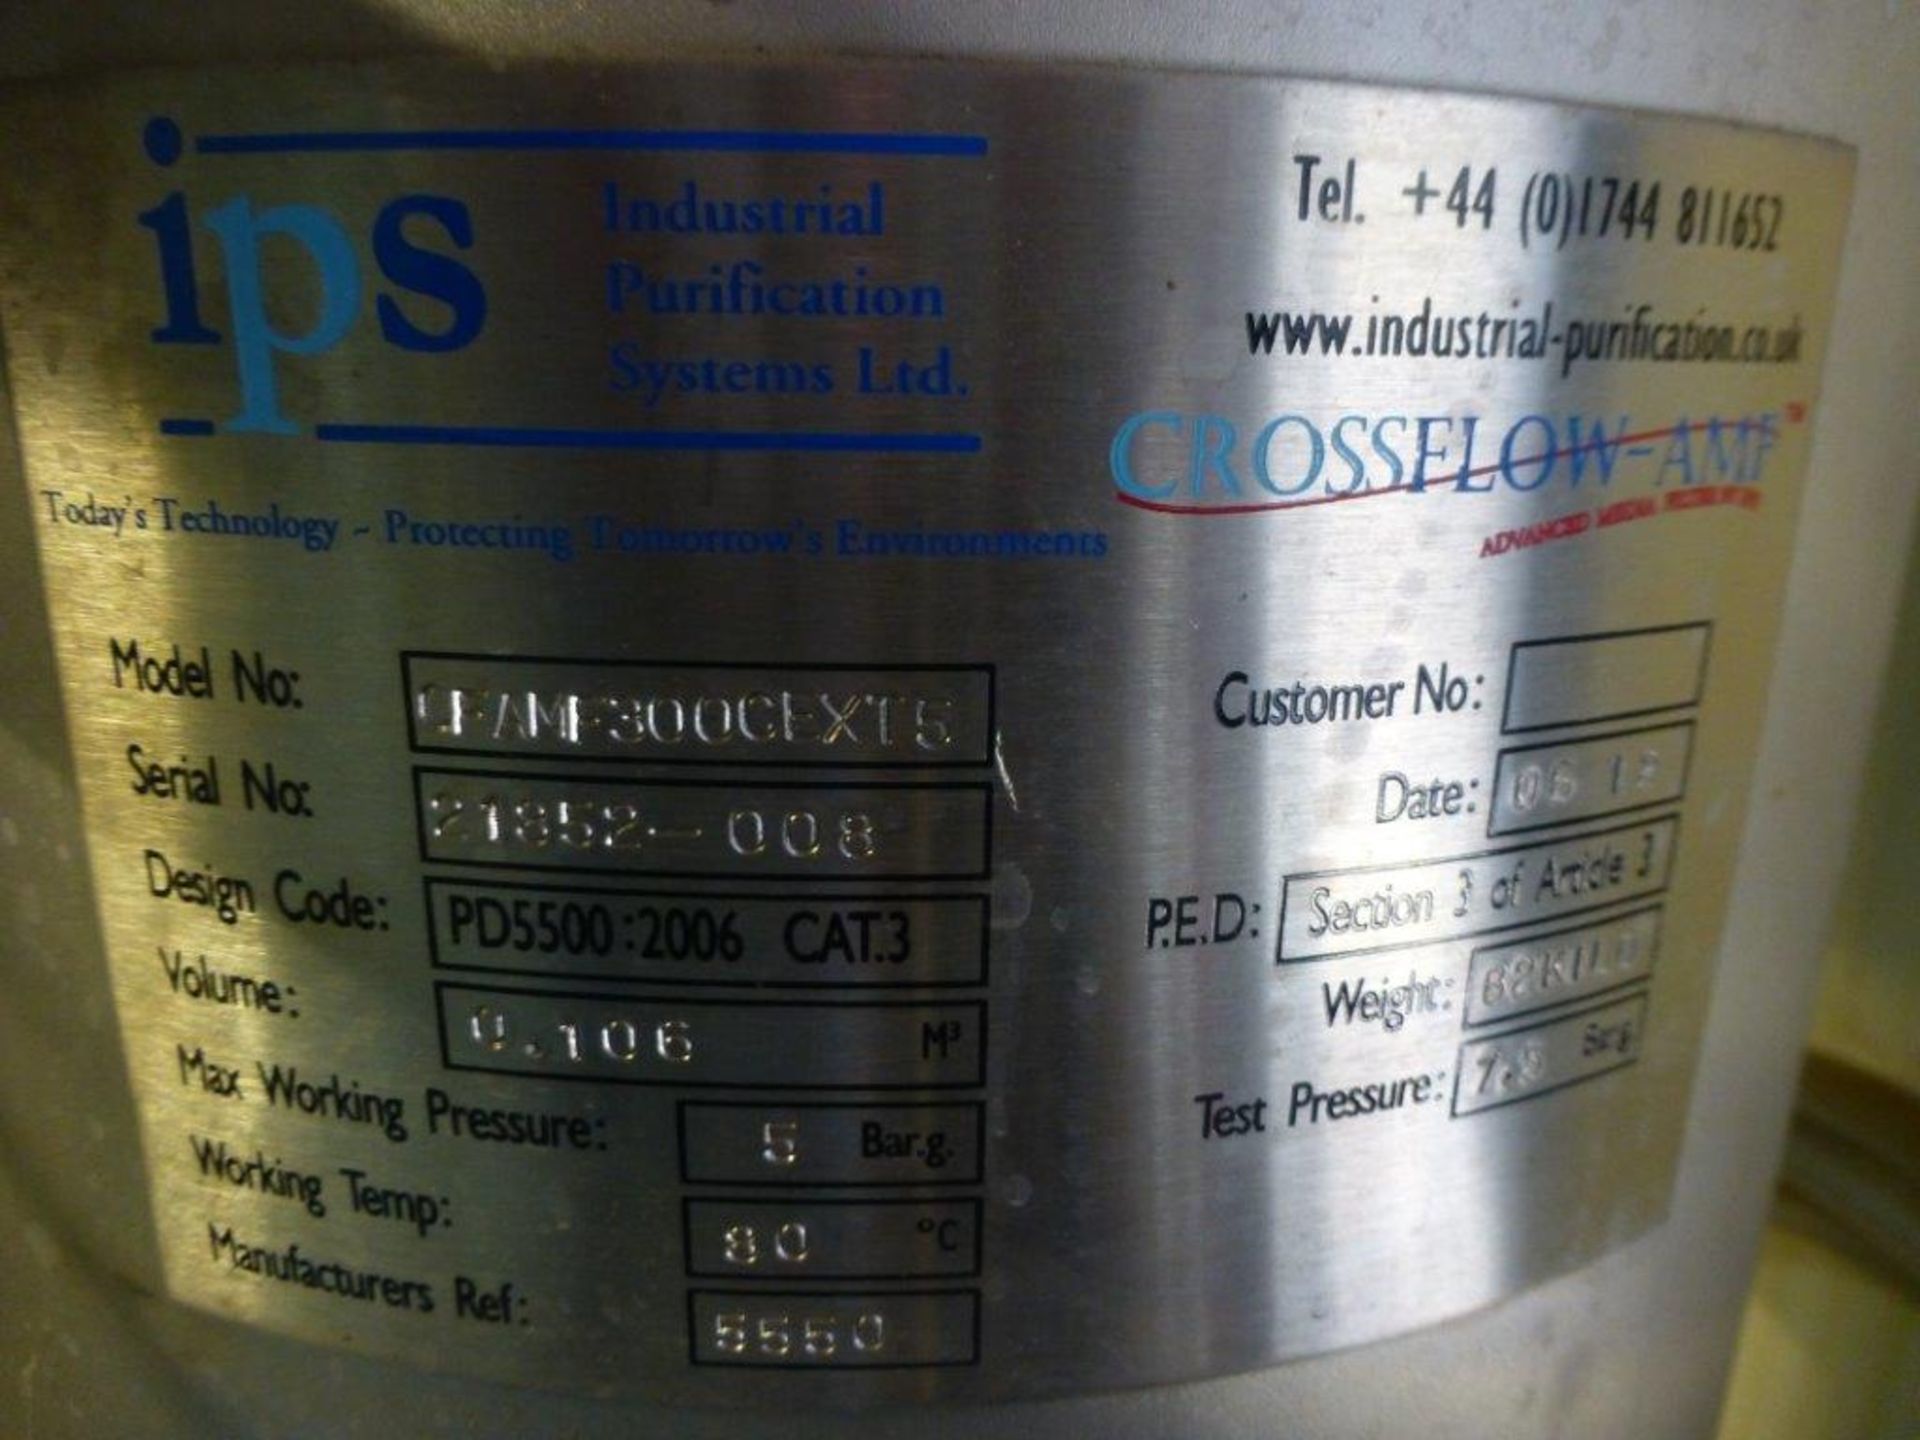 IPS Crossflow-AMF CFAMF300CEXT5 advanced media filter, serial no 21852-008 (2012) - Image 3 of 3